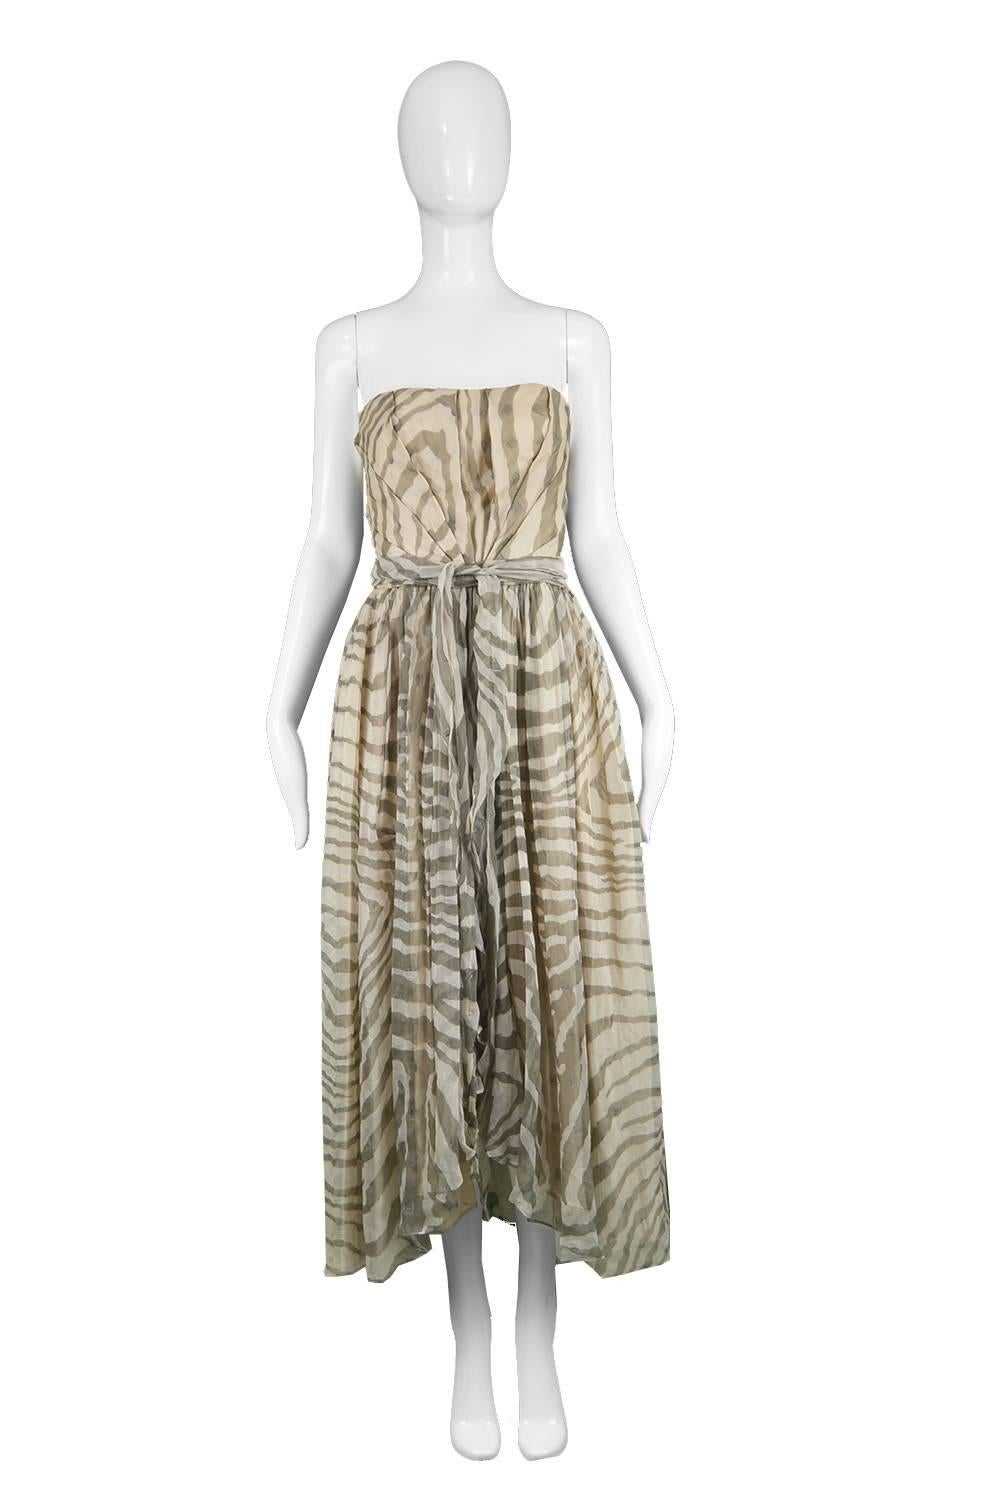 Bruce Oldfield Vintage 1980s Cream Silk Chiffon Striped Strapless Party Dress

Estimated Size: UK 6-8/ US 2-4/ EU 34-36. Please check measurements.
Bust - 32” / 81cm
Waist - 24” / 61cm
Hips - Free
Length (Bust to Hem) - 42” / 106cm

Condition: Very